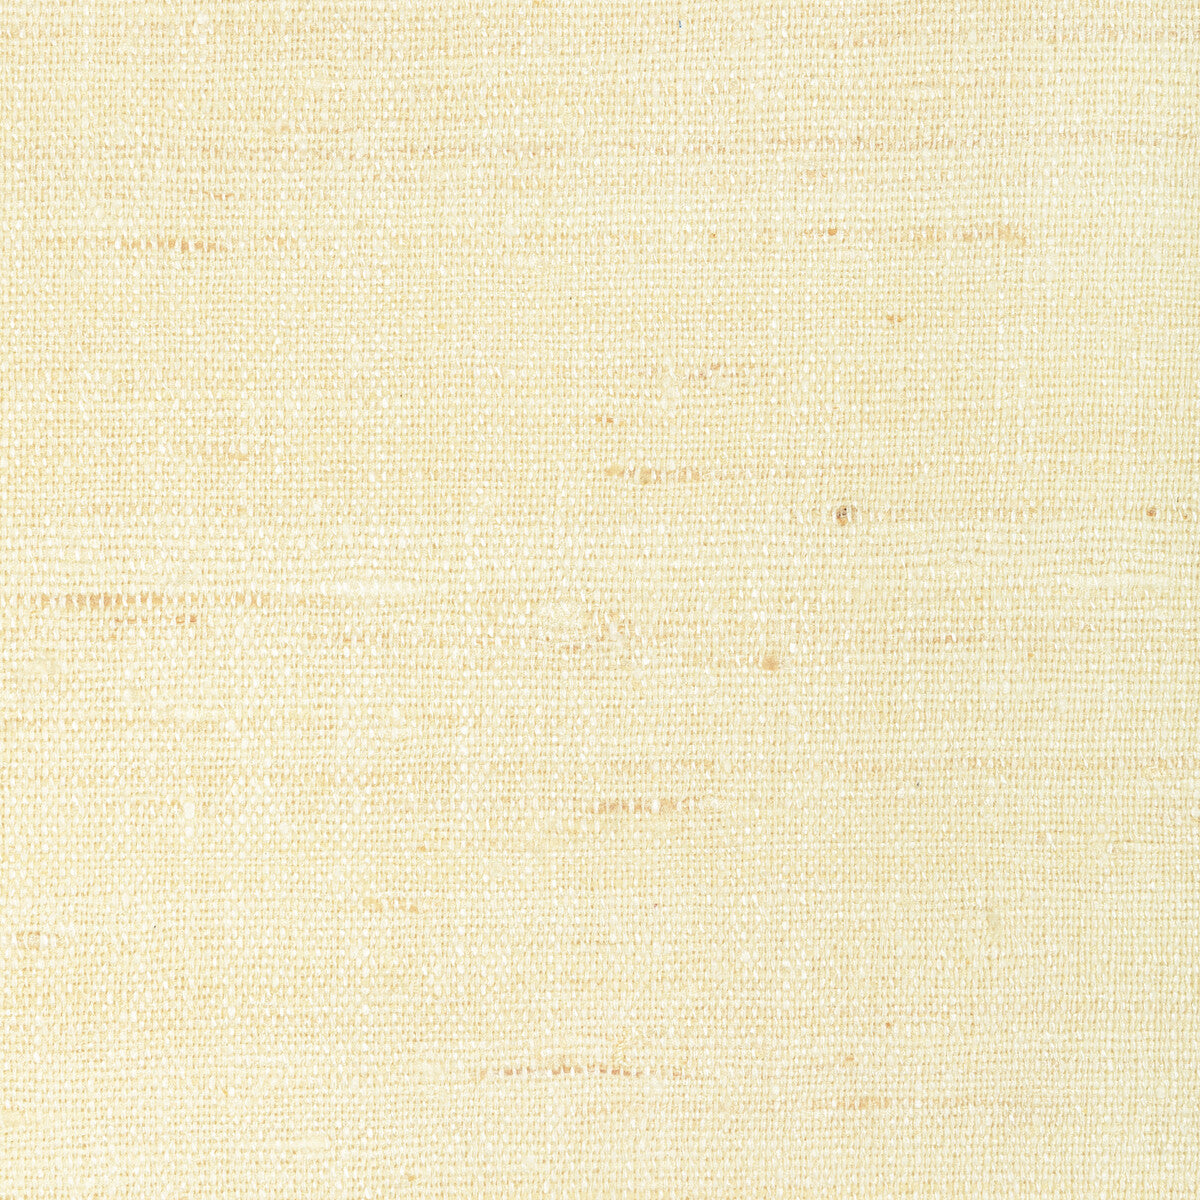 Light Touch fabric in champagne color - pattern 4898.1.0 - by Kravet Couture in the Barbara Barry Ojai collection